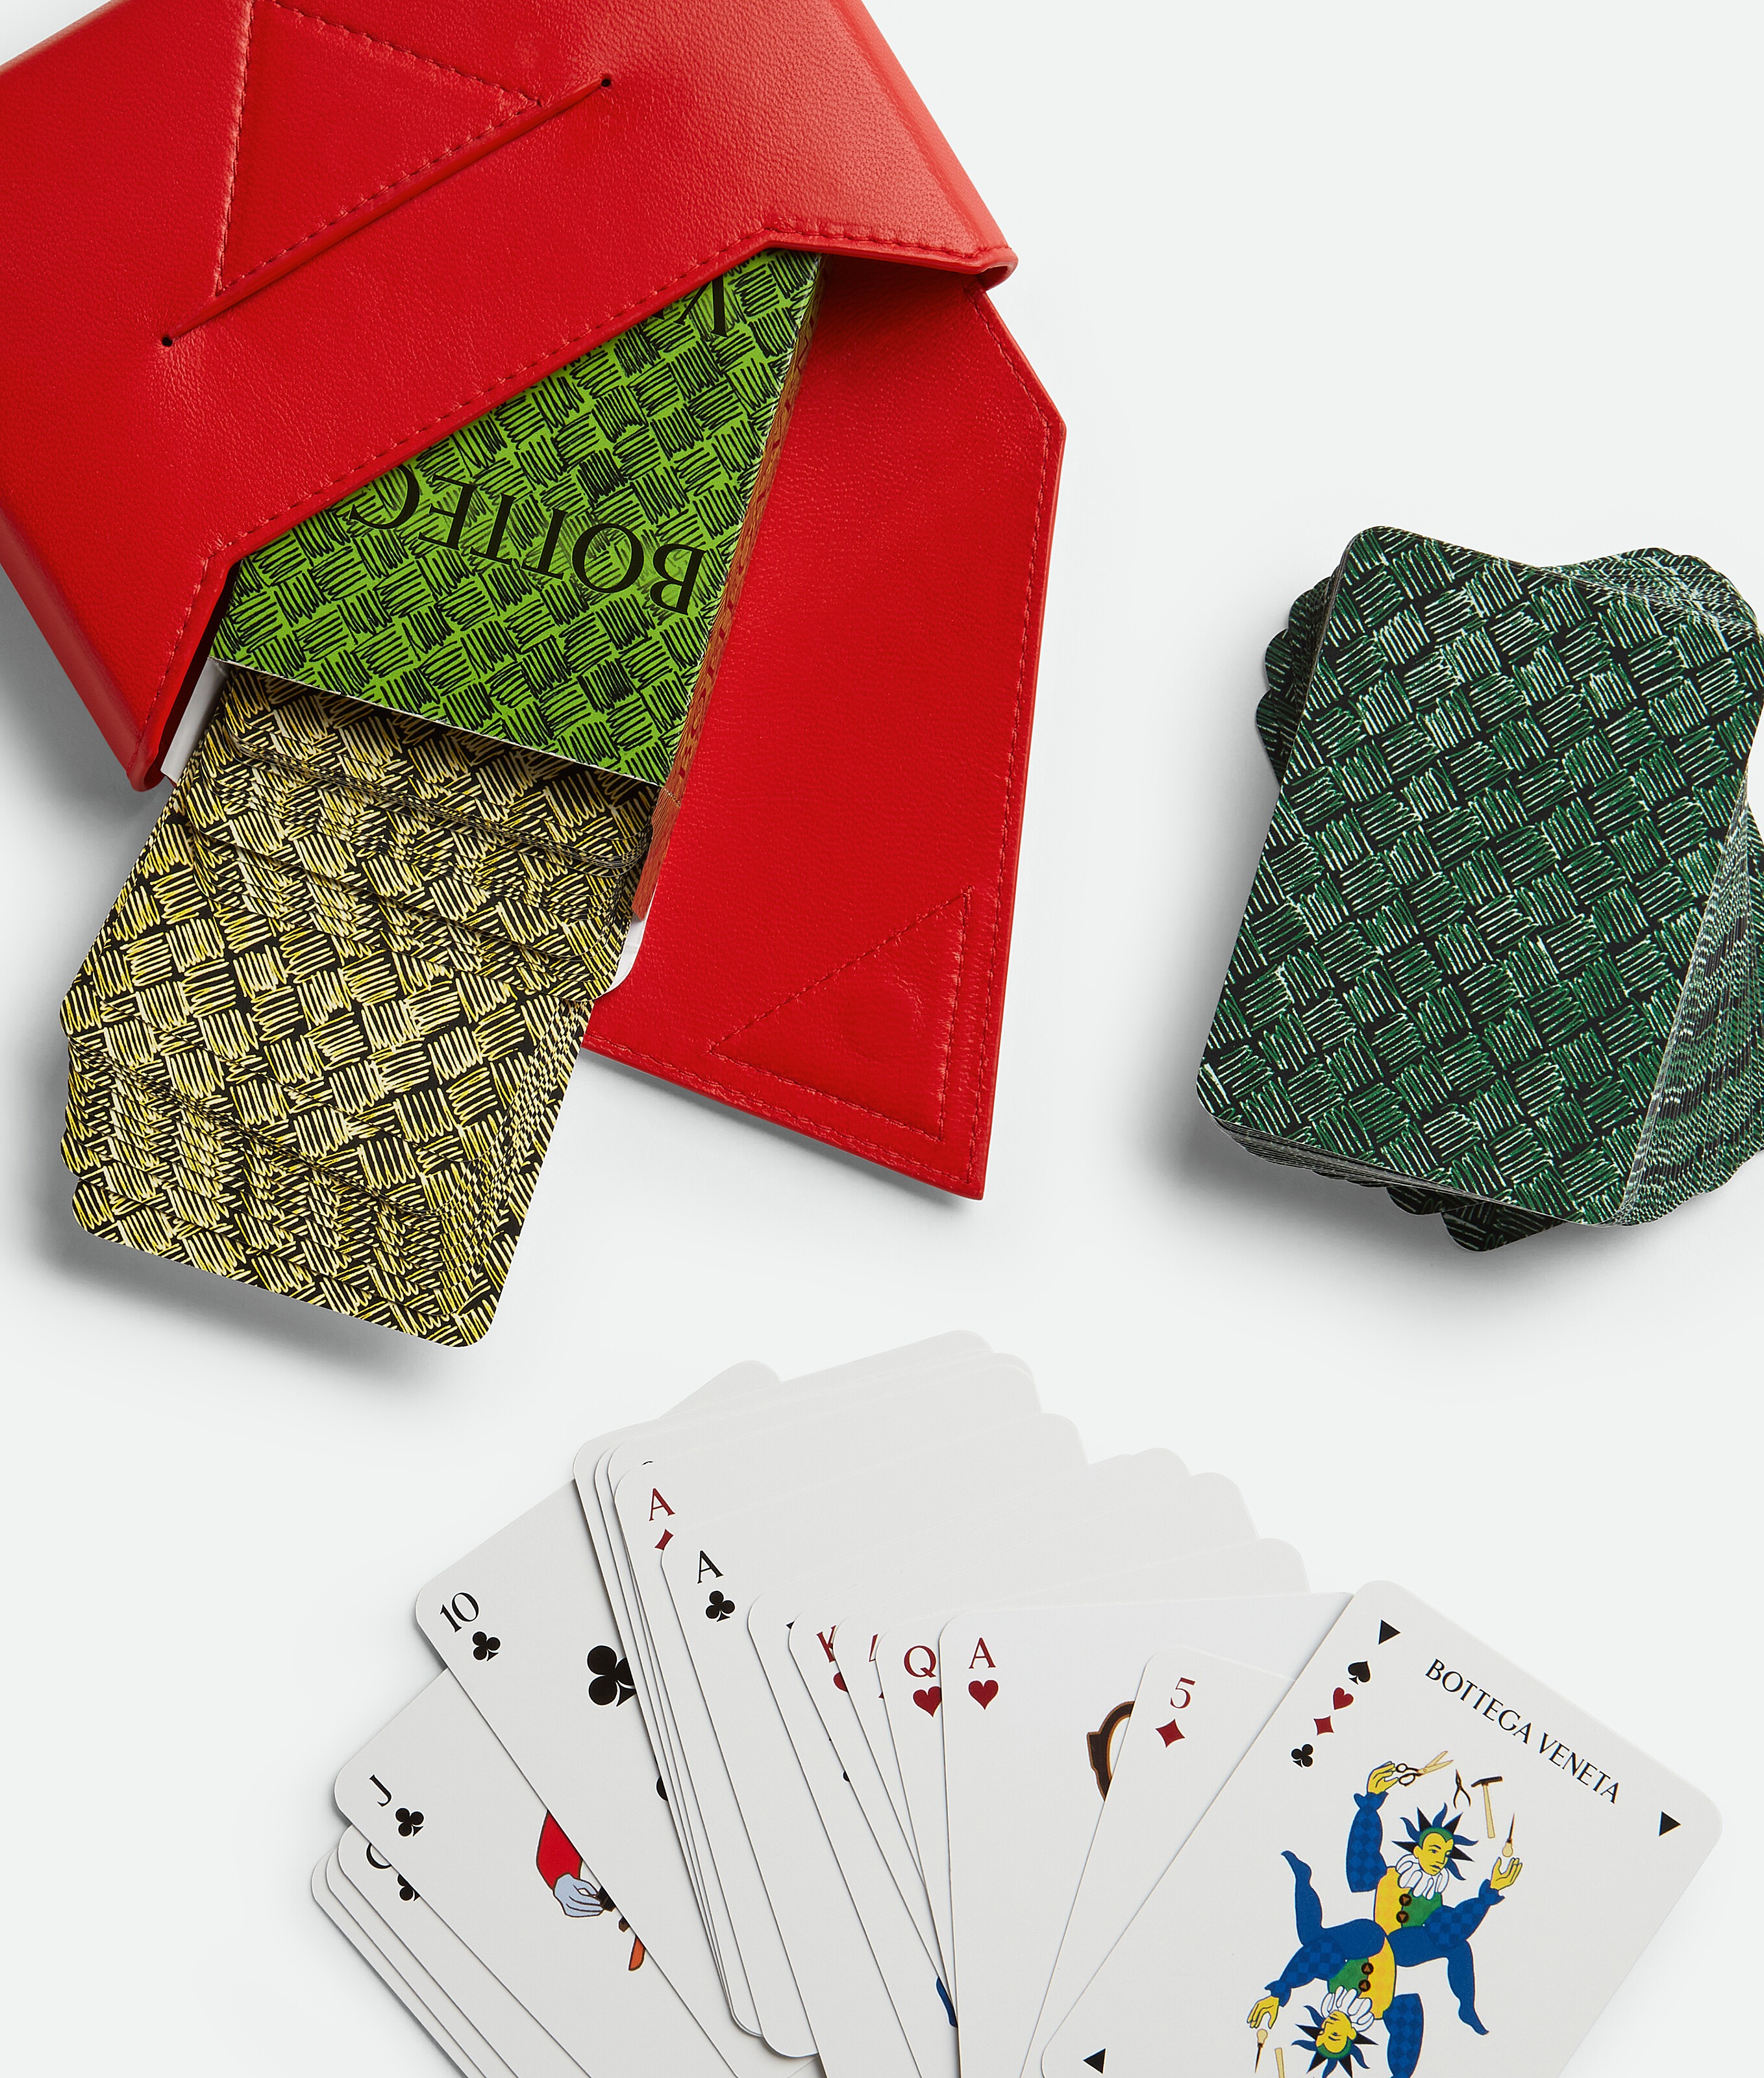 A set of Bottega Veneta playing cards with green backsides and a red case